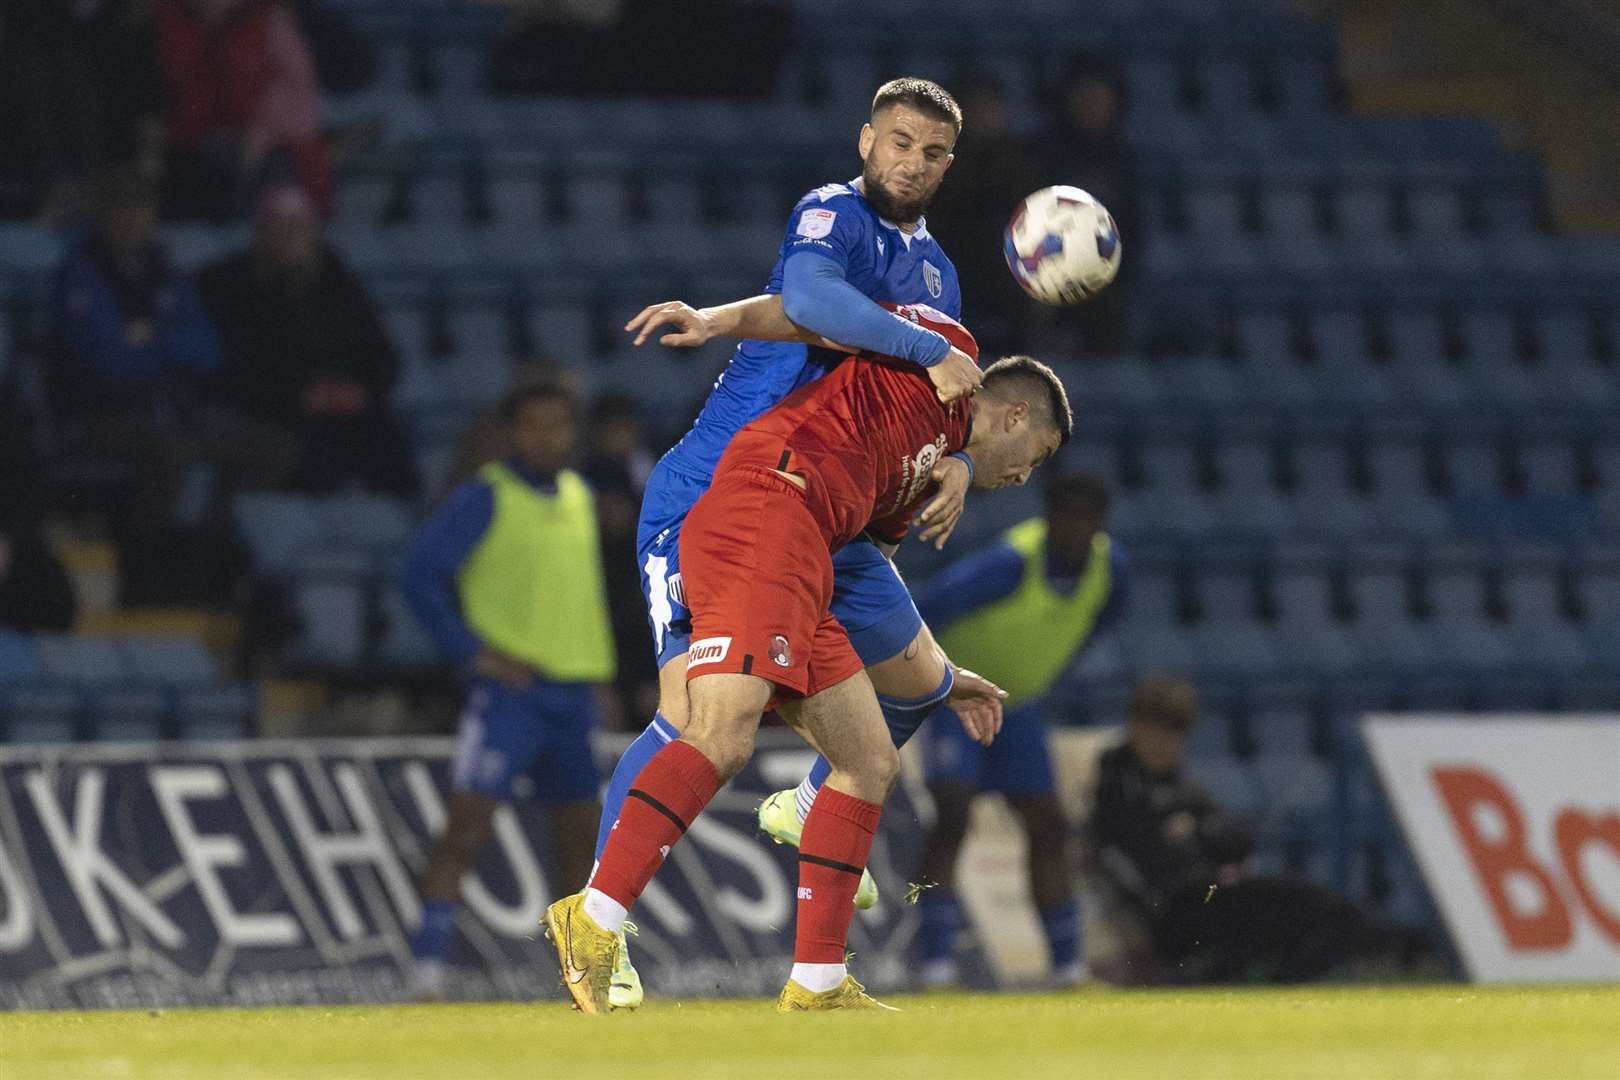 Max Ehmer challenges for the ball as Gillingham take on Leyton Orient